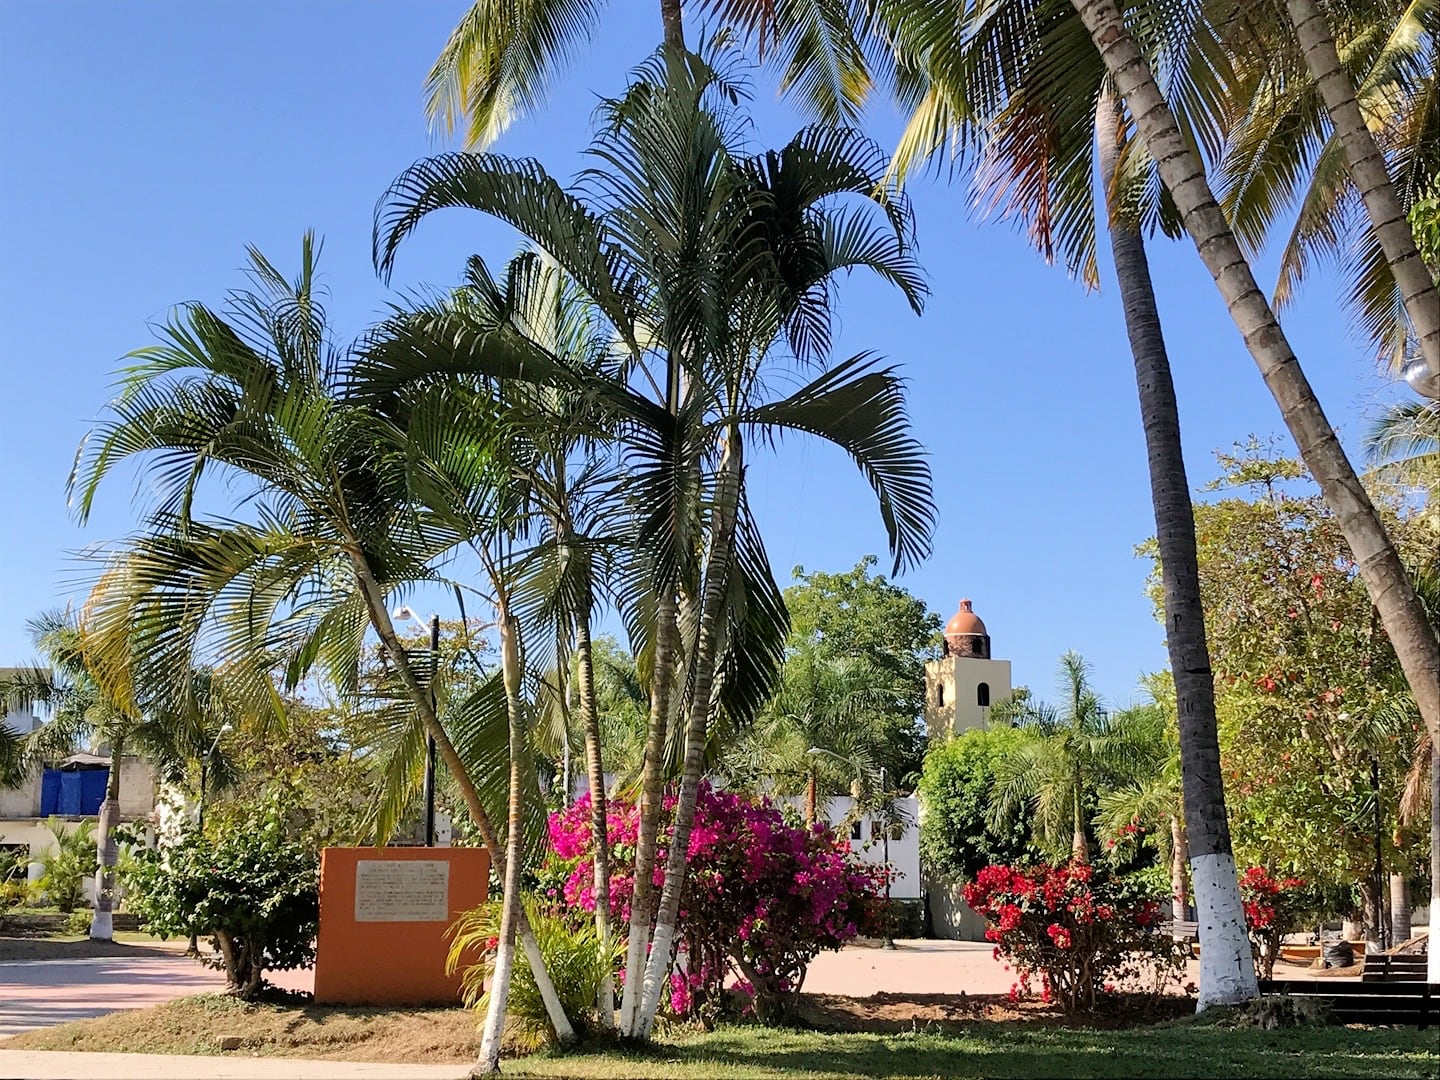 church and palm trees on a sunny day in Higuera Blanca, Nayarit